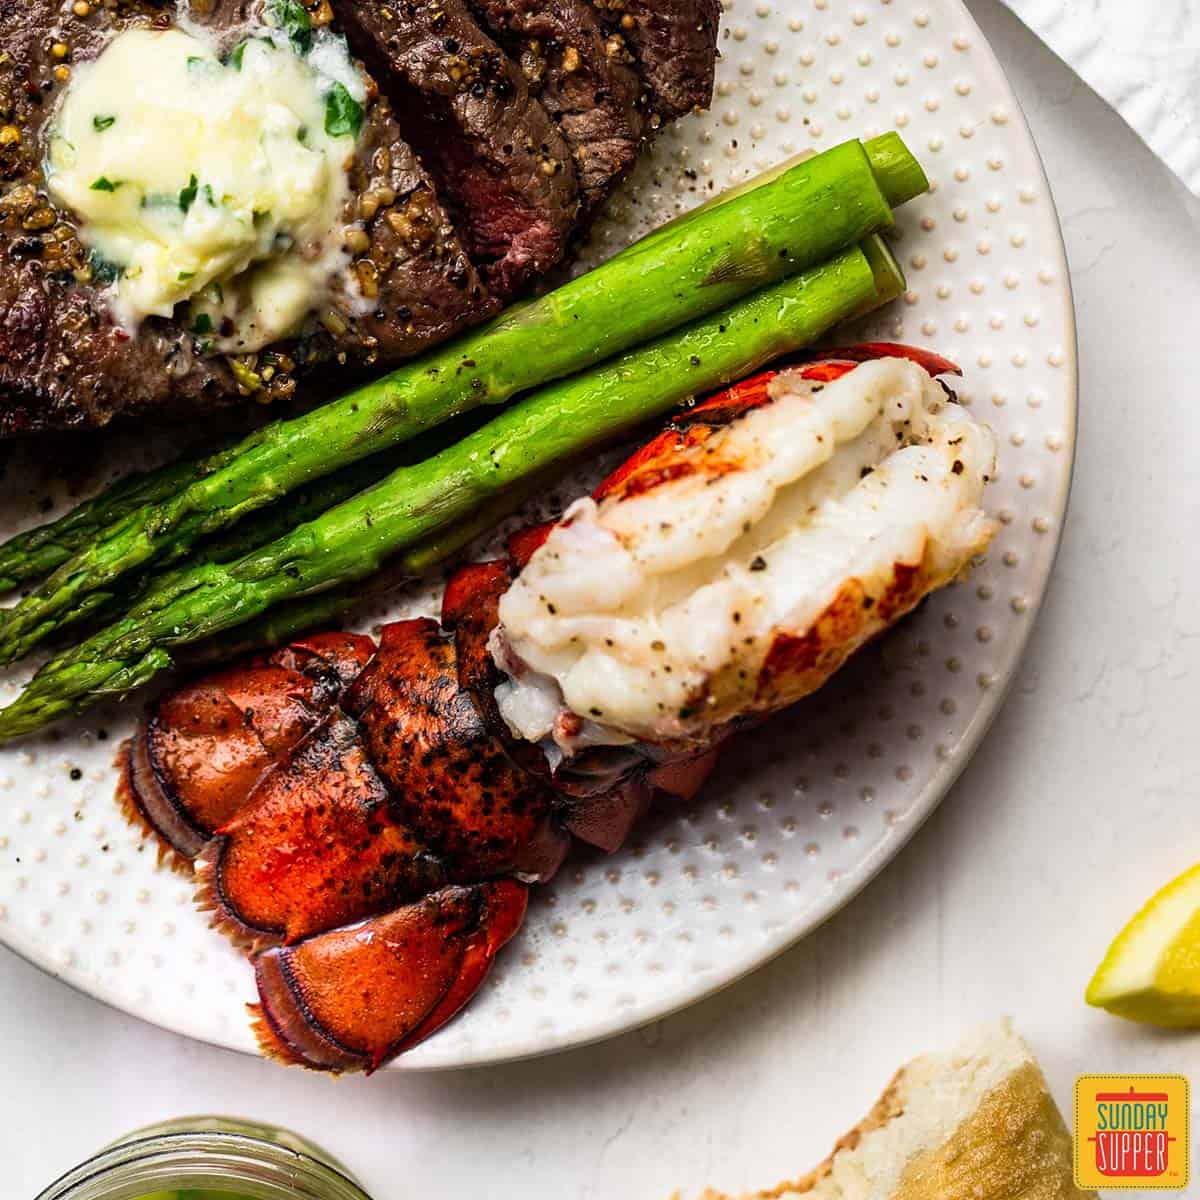 Air fryer lobster tail on a plate with asparagus and steak